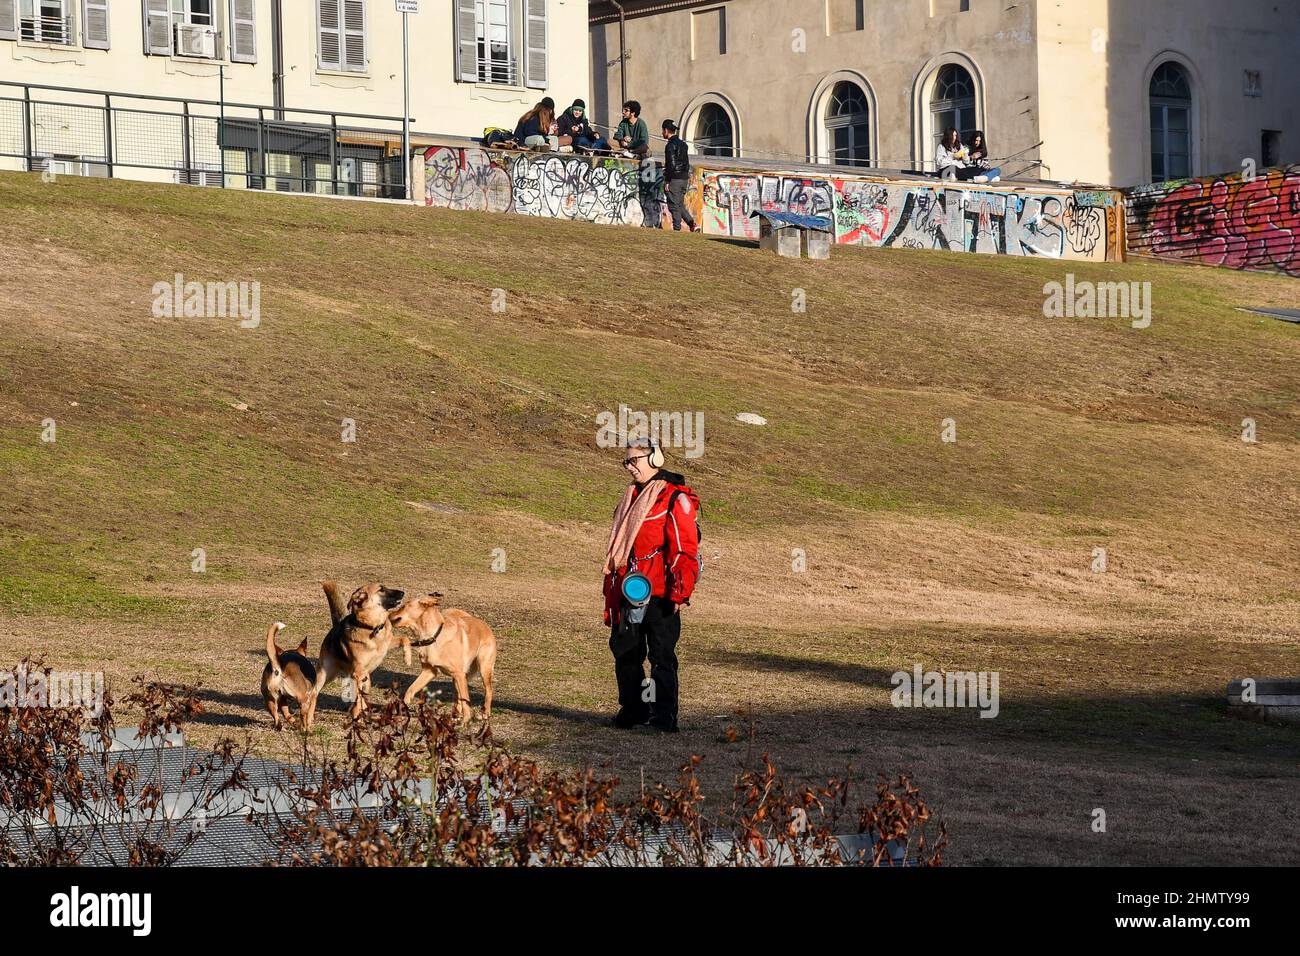 A girl playing with her dogs with a group of teenagers sitting on a graffiti wall in the background in a sunny winter day, Turin, Piedmont, Italy Stock Photo